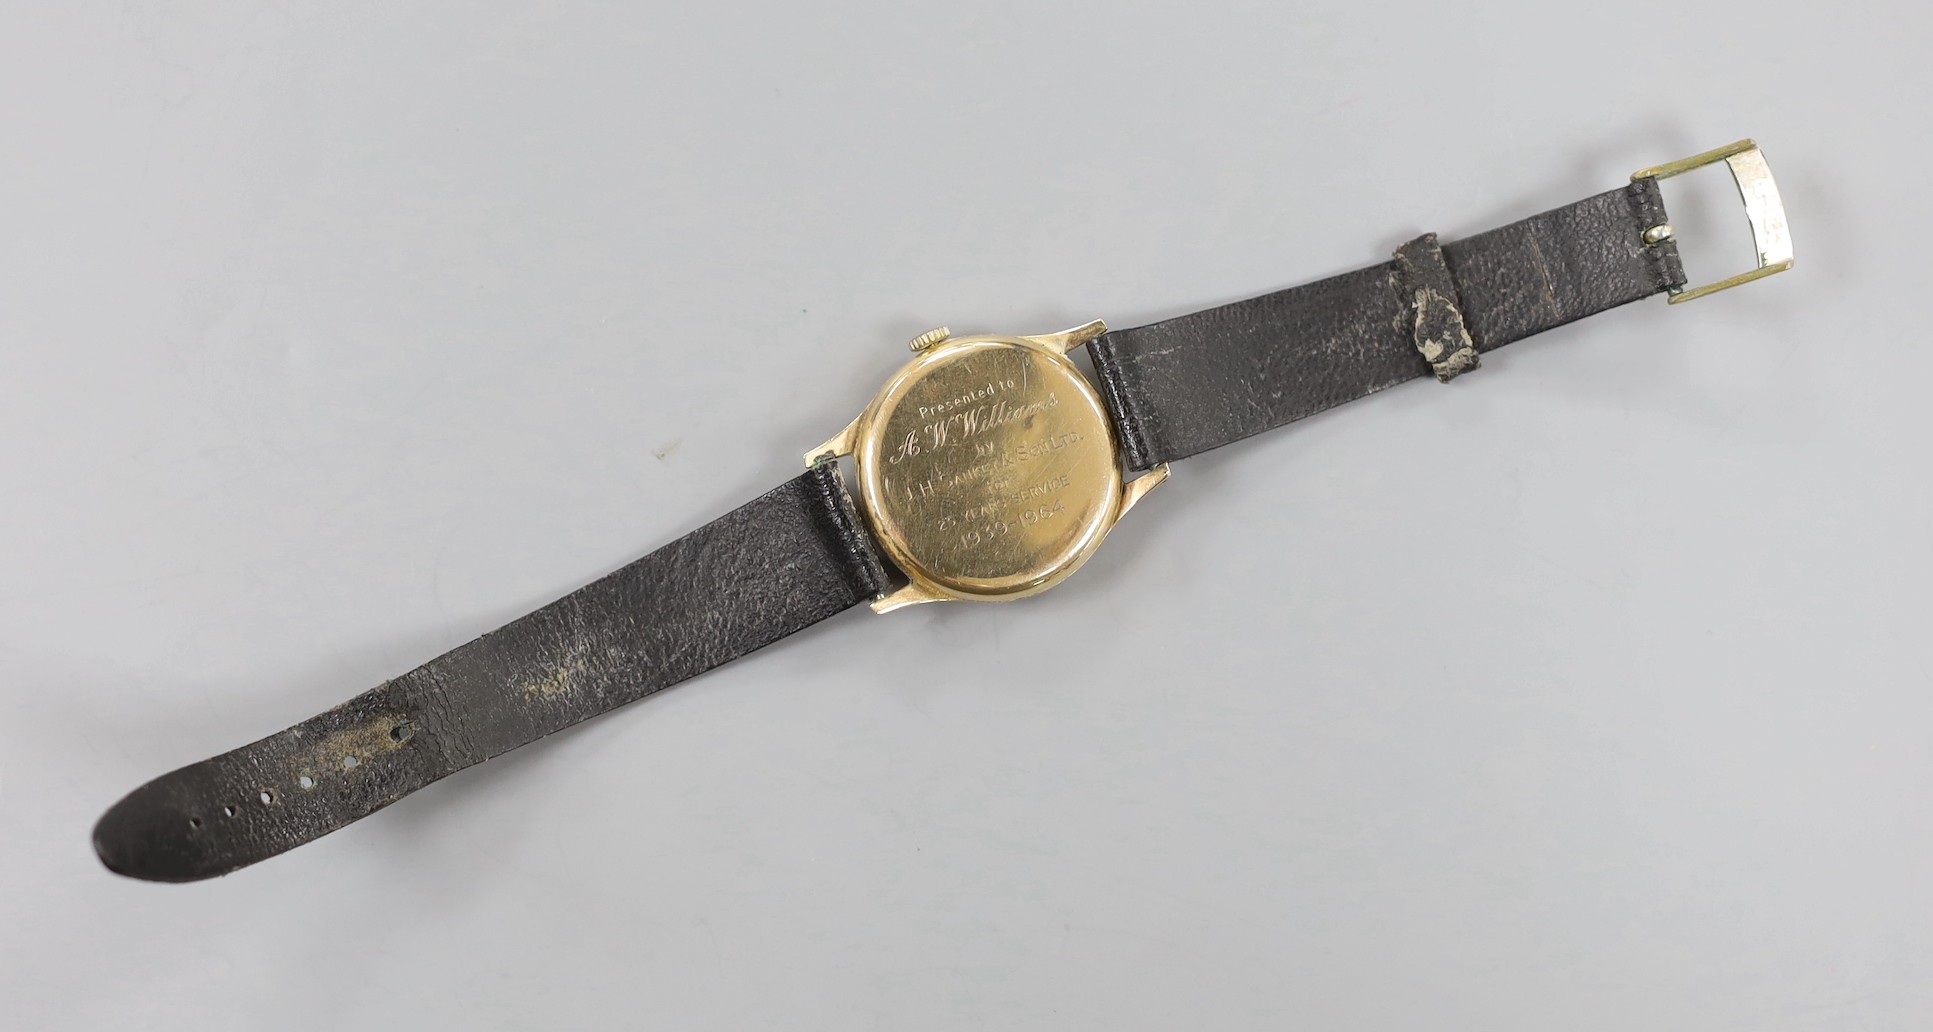 A gentleman's 1960's 9ct gold Longines manual wind wrist watch, with case back inscription, case diameter 33mm, on associated leather strap, gross weight 36.5 grams.